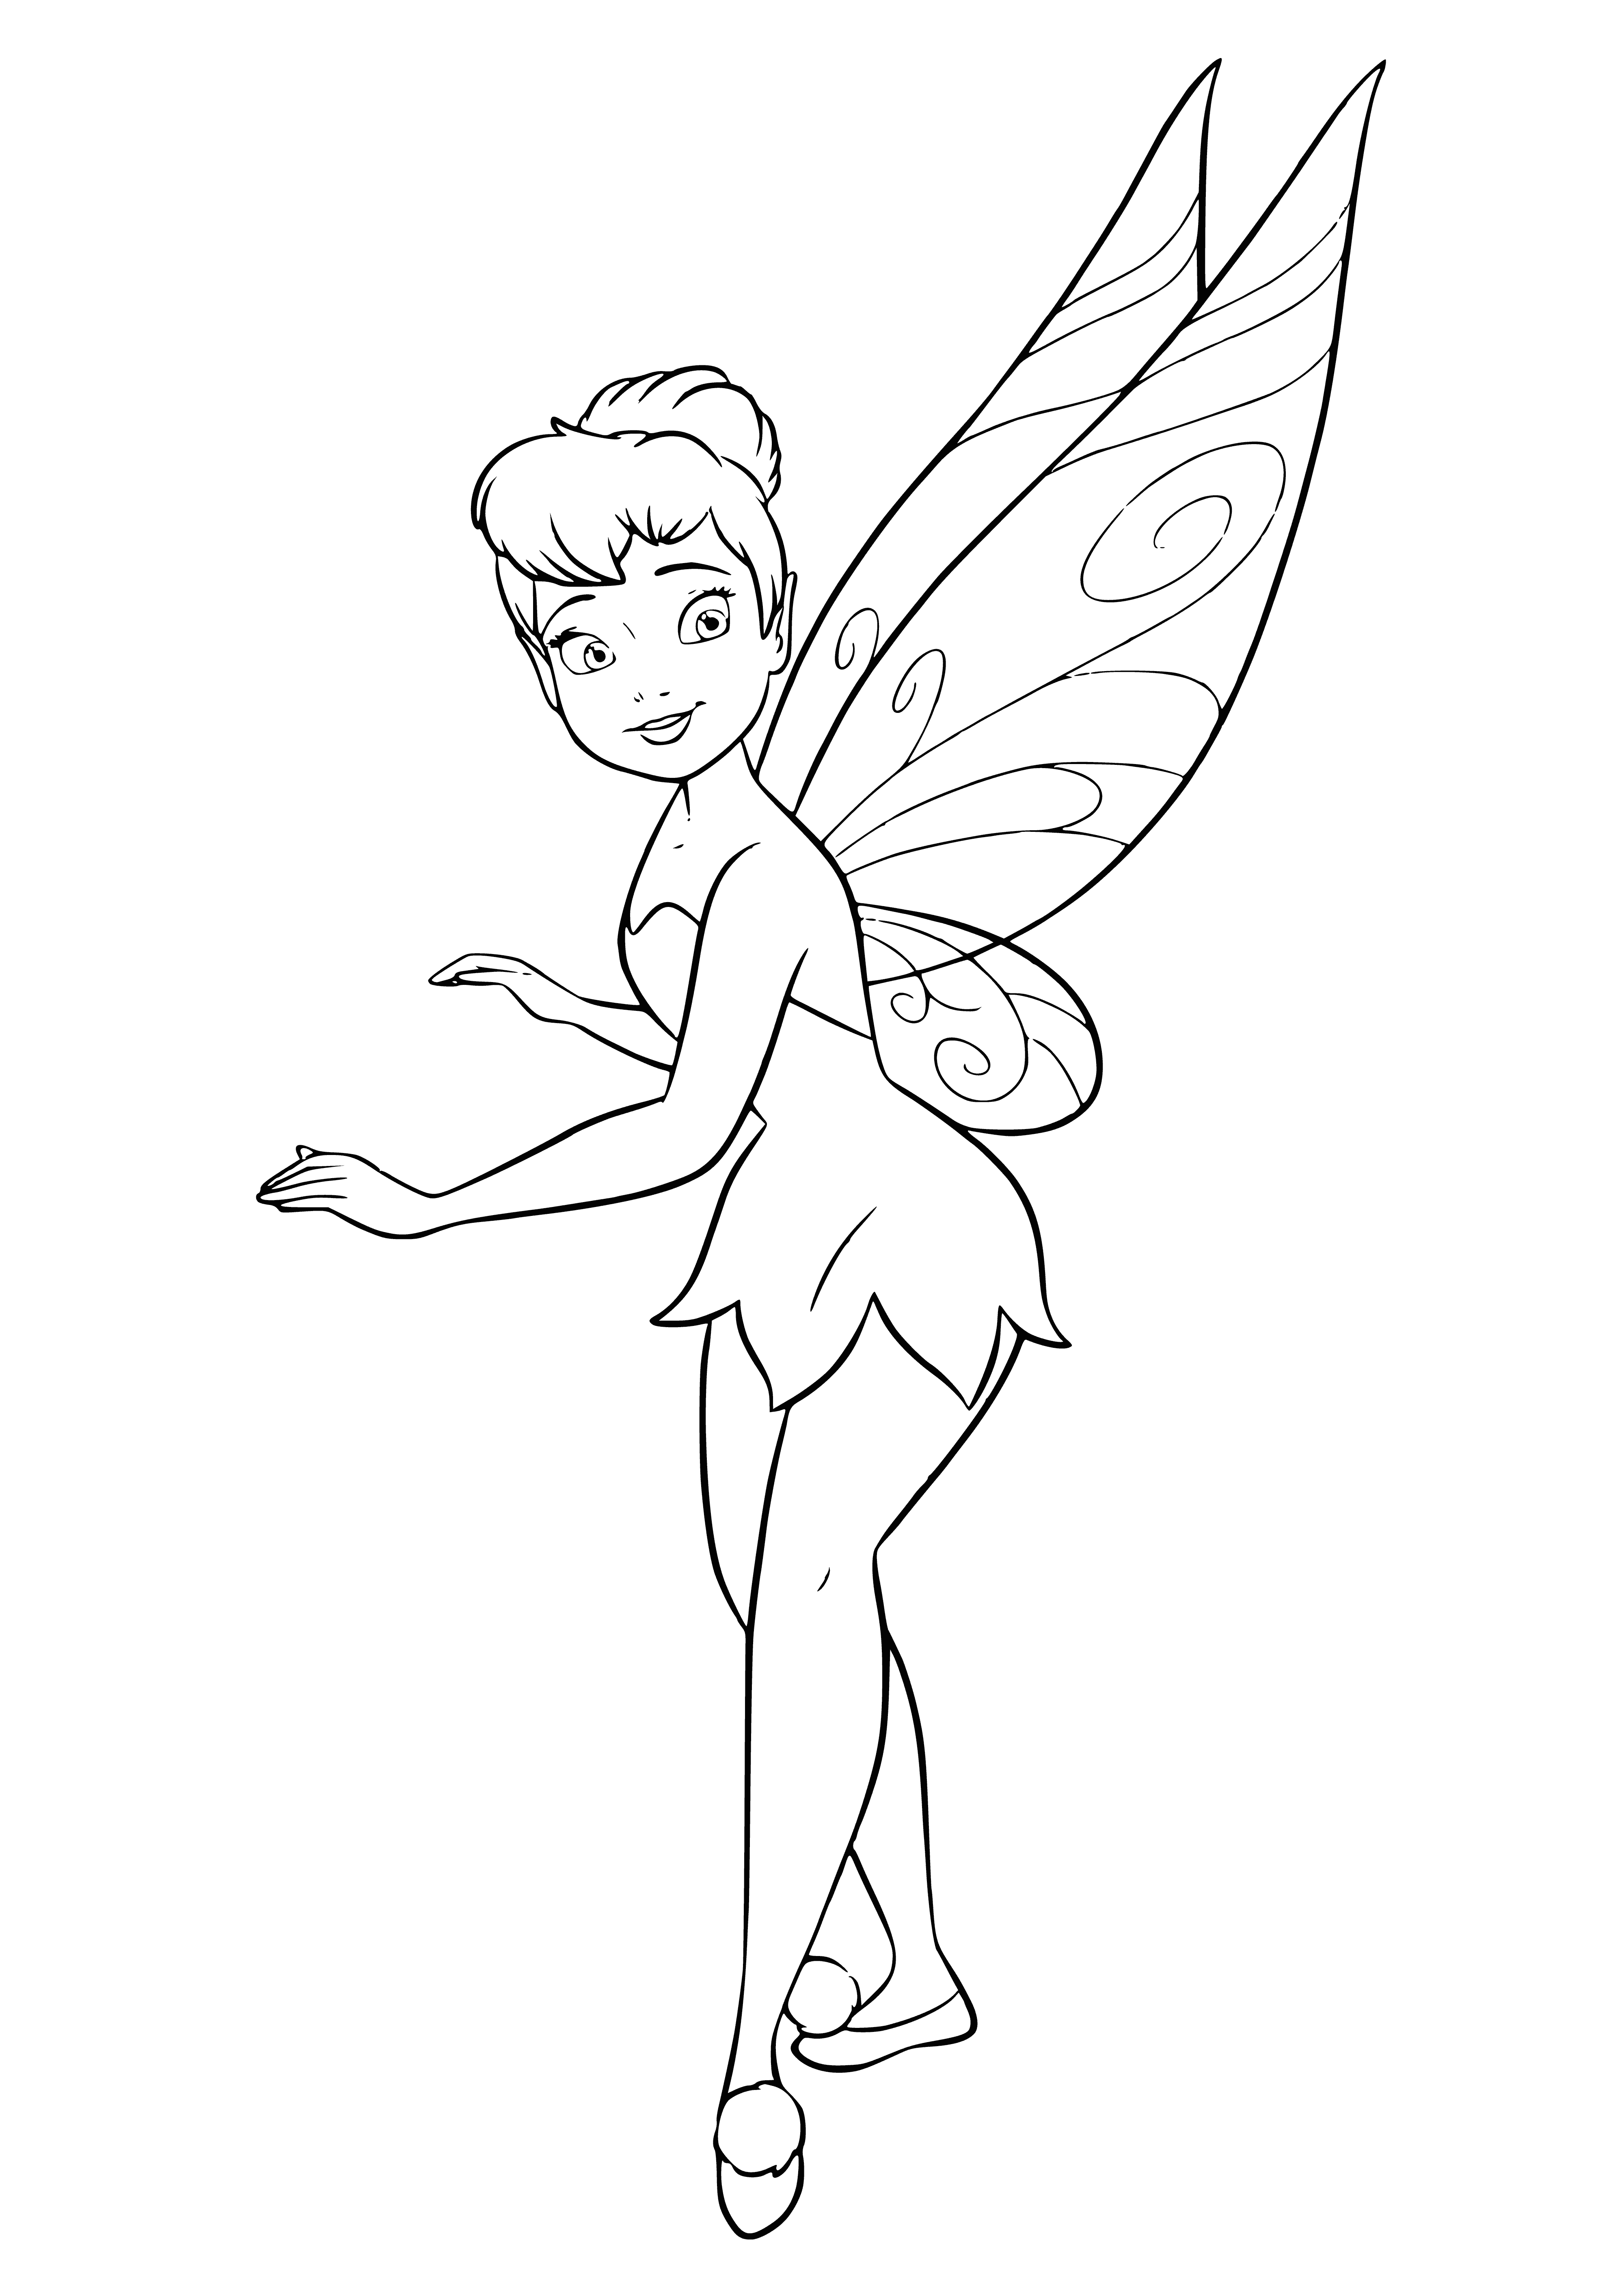 coloring page: Fairy repairs a colorful Ding Ding w/string & needle, flying w/wide blue wings. Hole in Ding Ding's side.